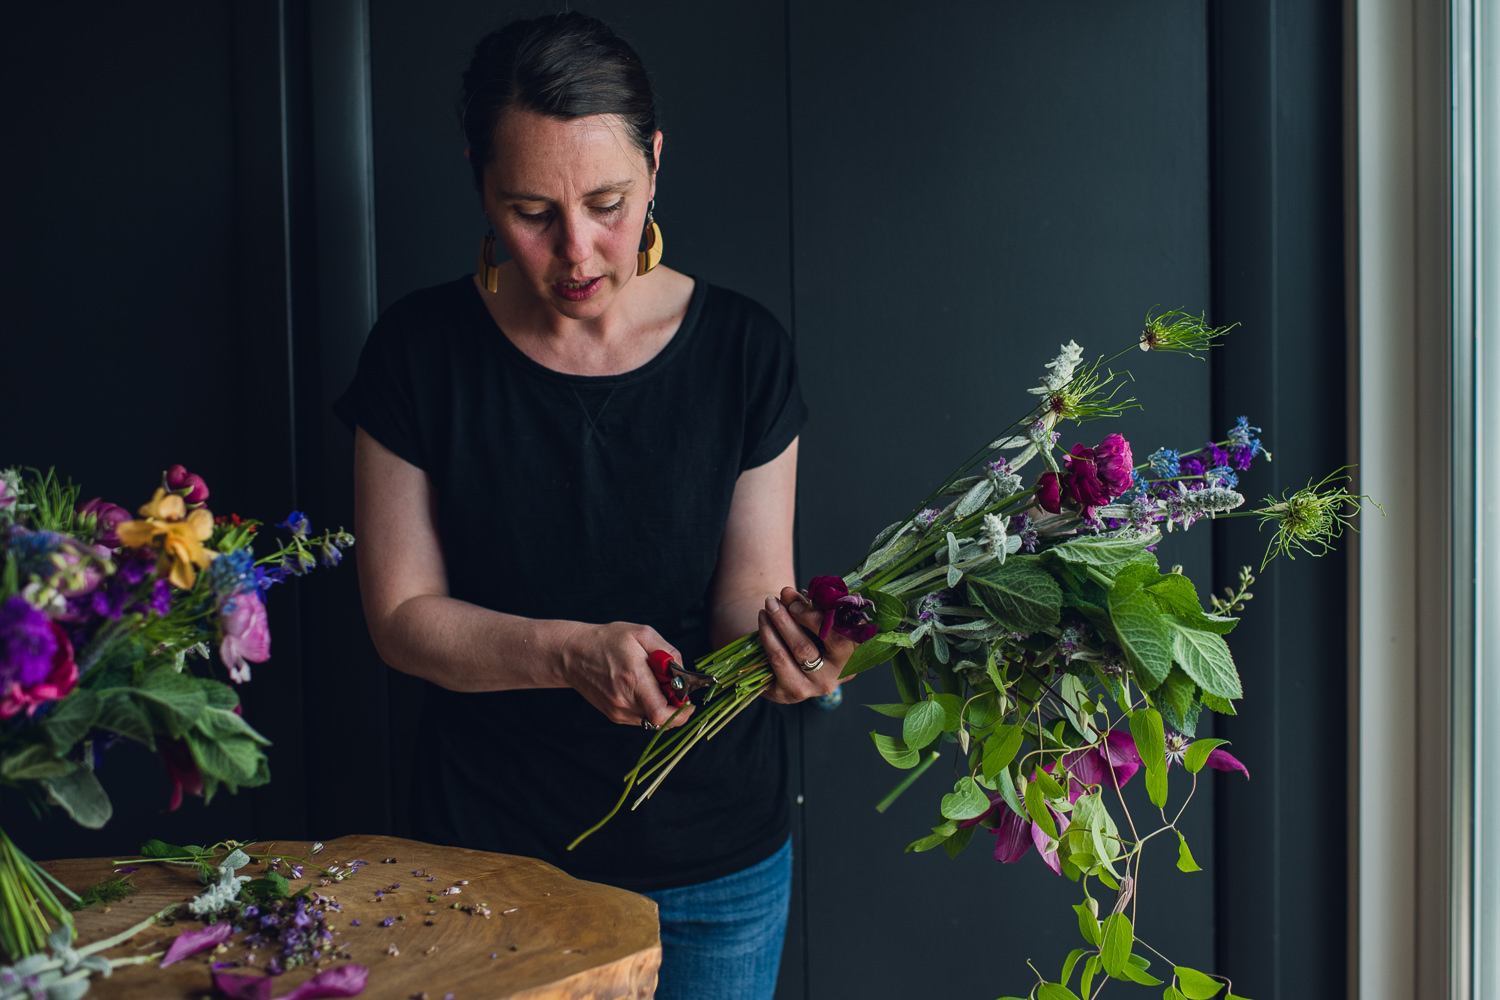 woman trimming flowers to create a vibrant bouquet